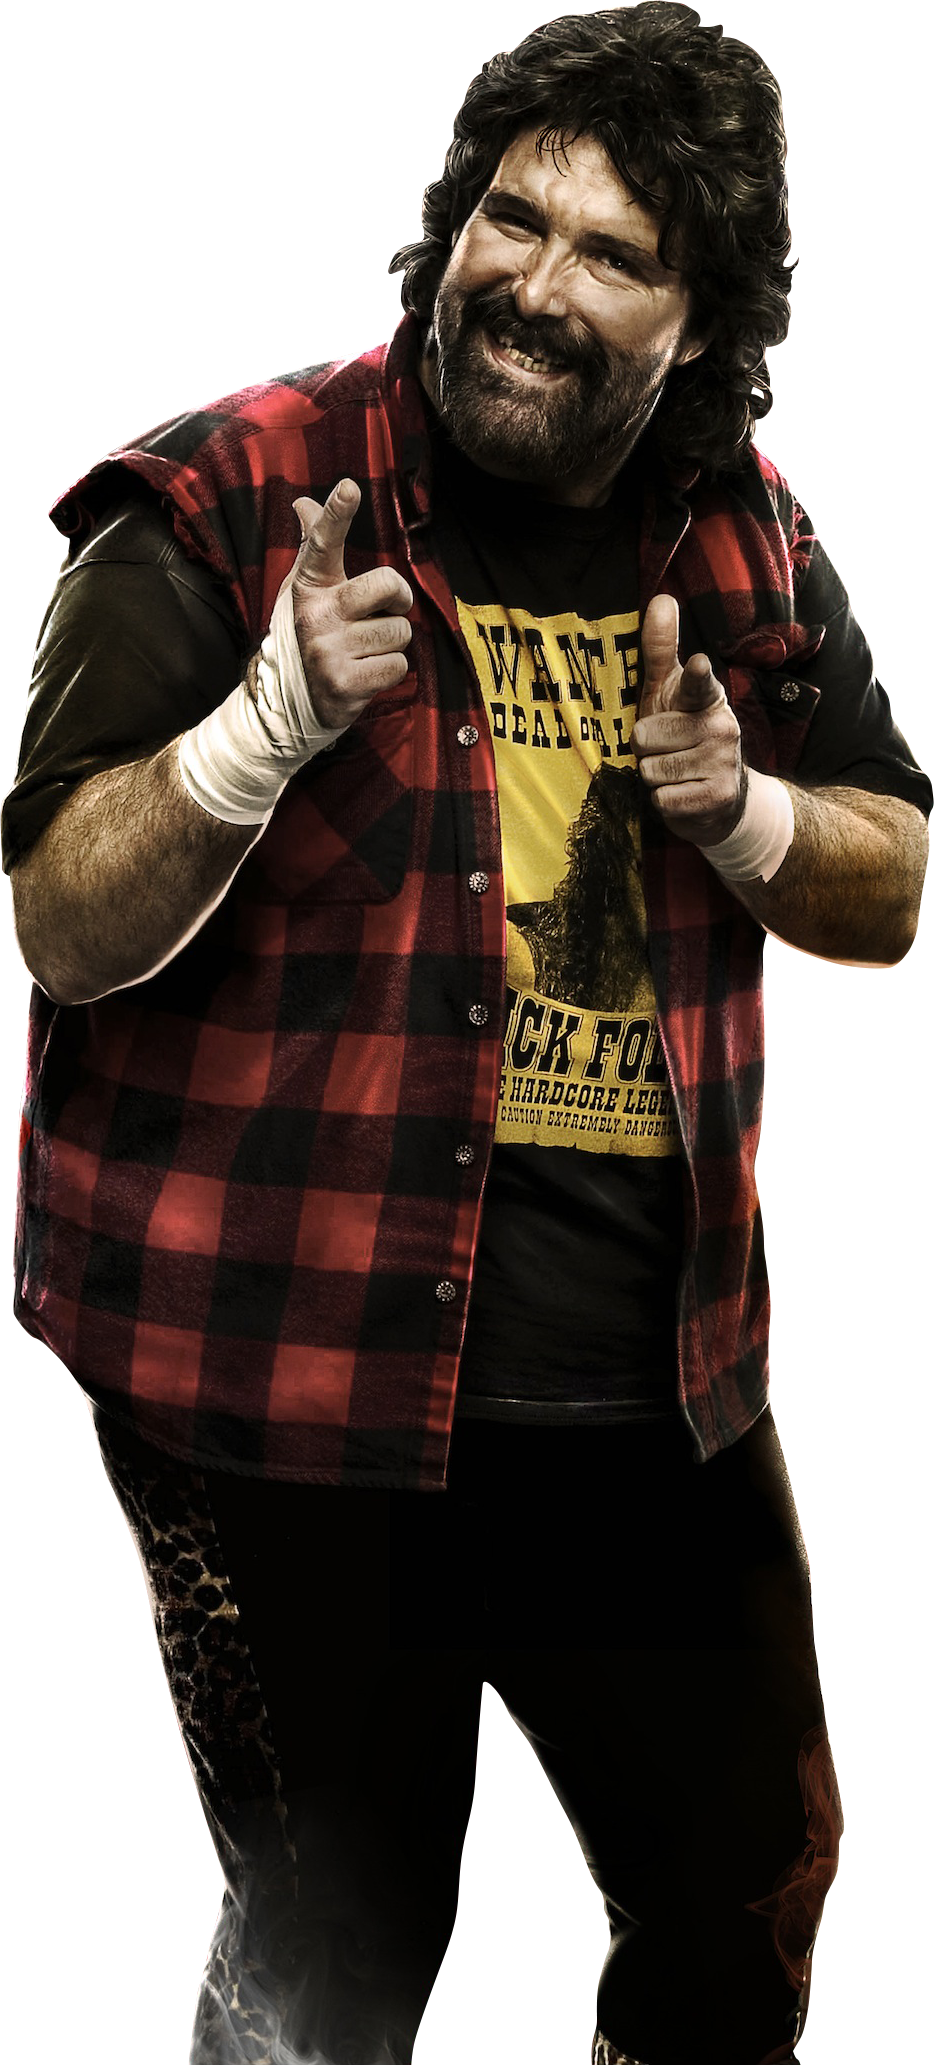 Wwe 2k14 Mick Foley Render Cutout By Thexrealxbanks On